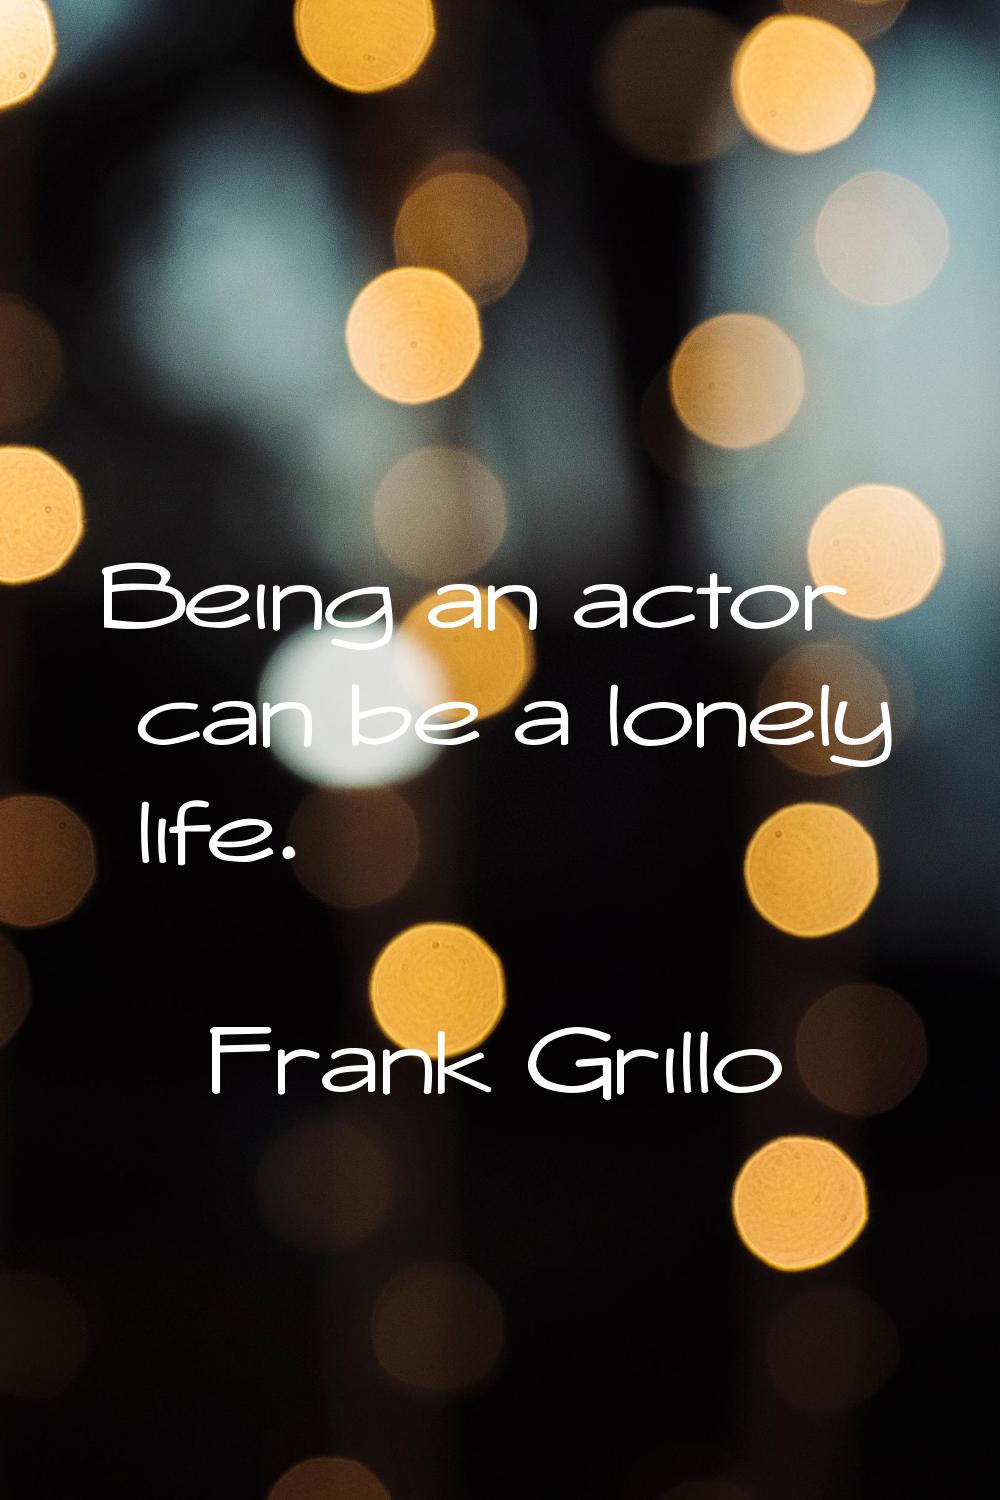 Being an actor can be a lonely life.